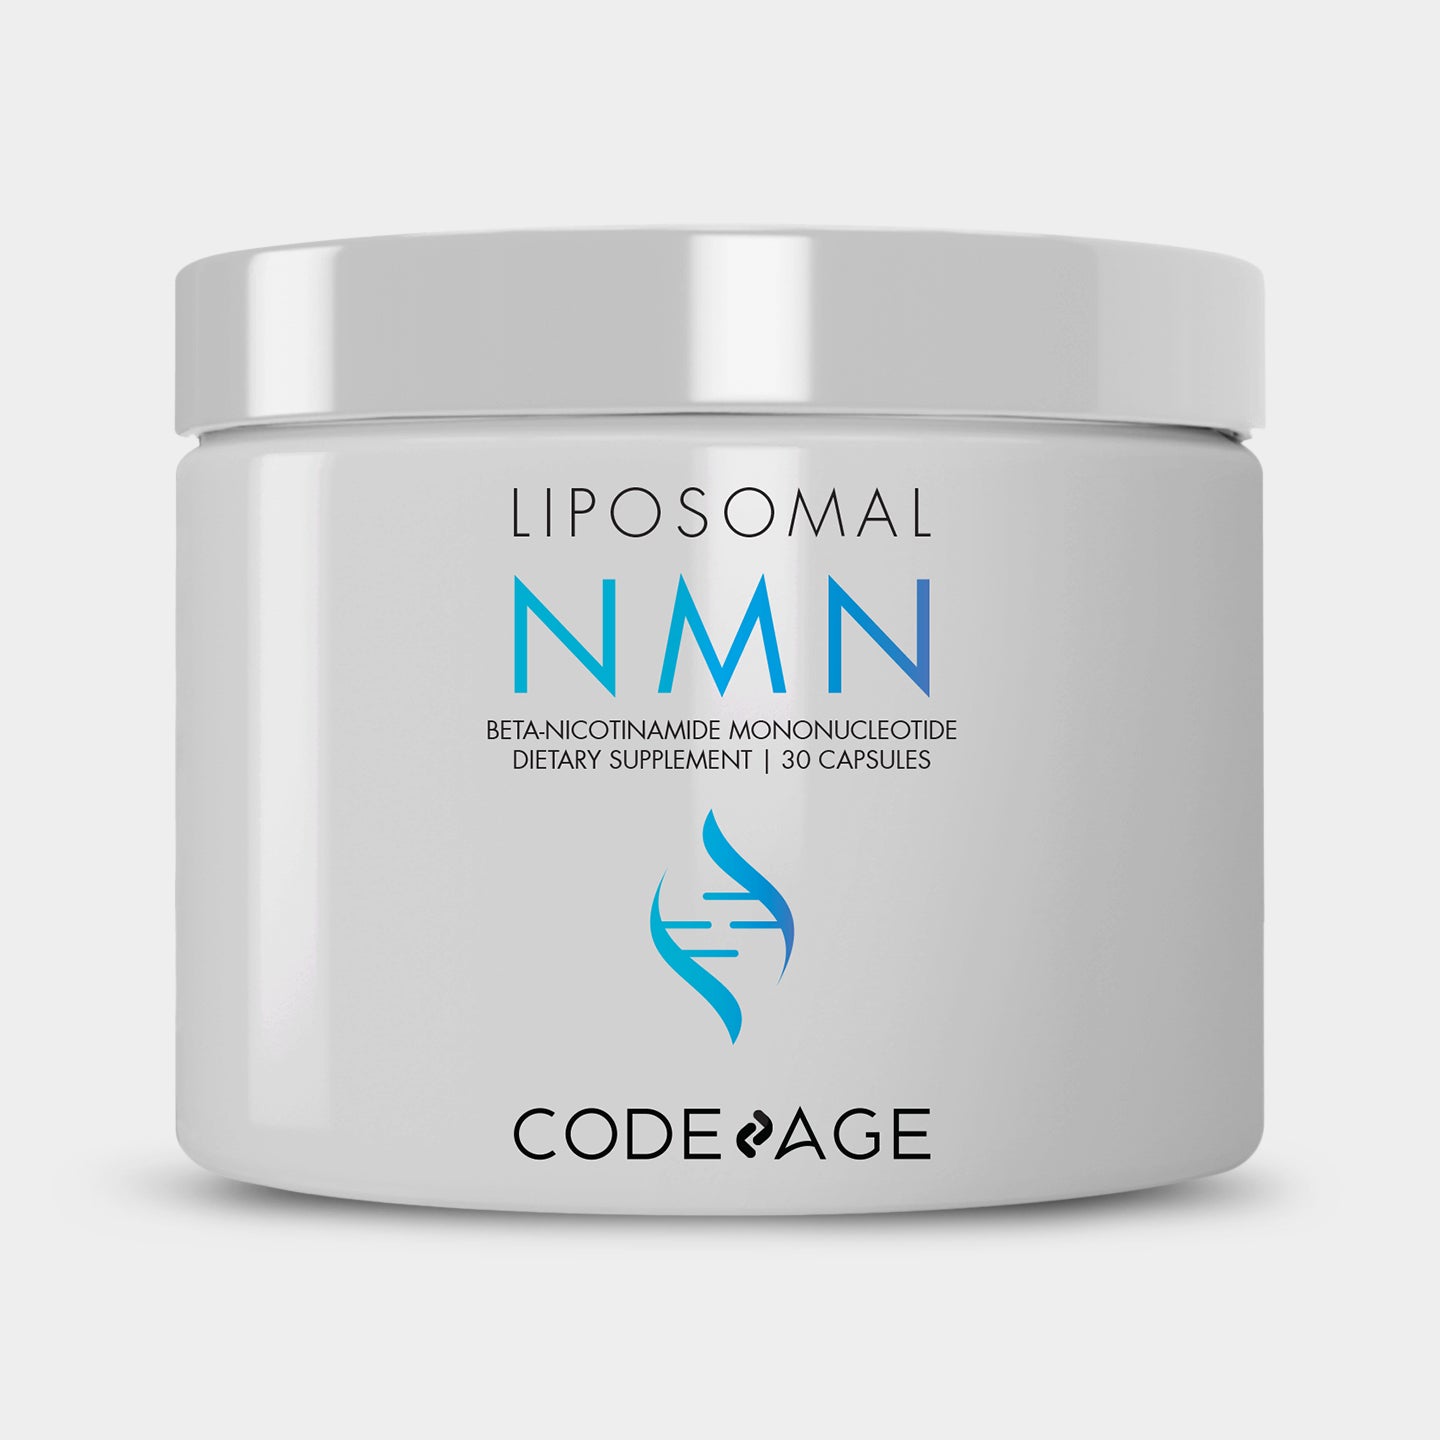 Codeage NMN & Betaine Anhydrous TMG Capsules Supplement A1